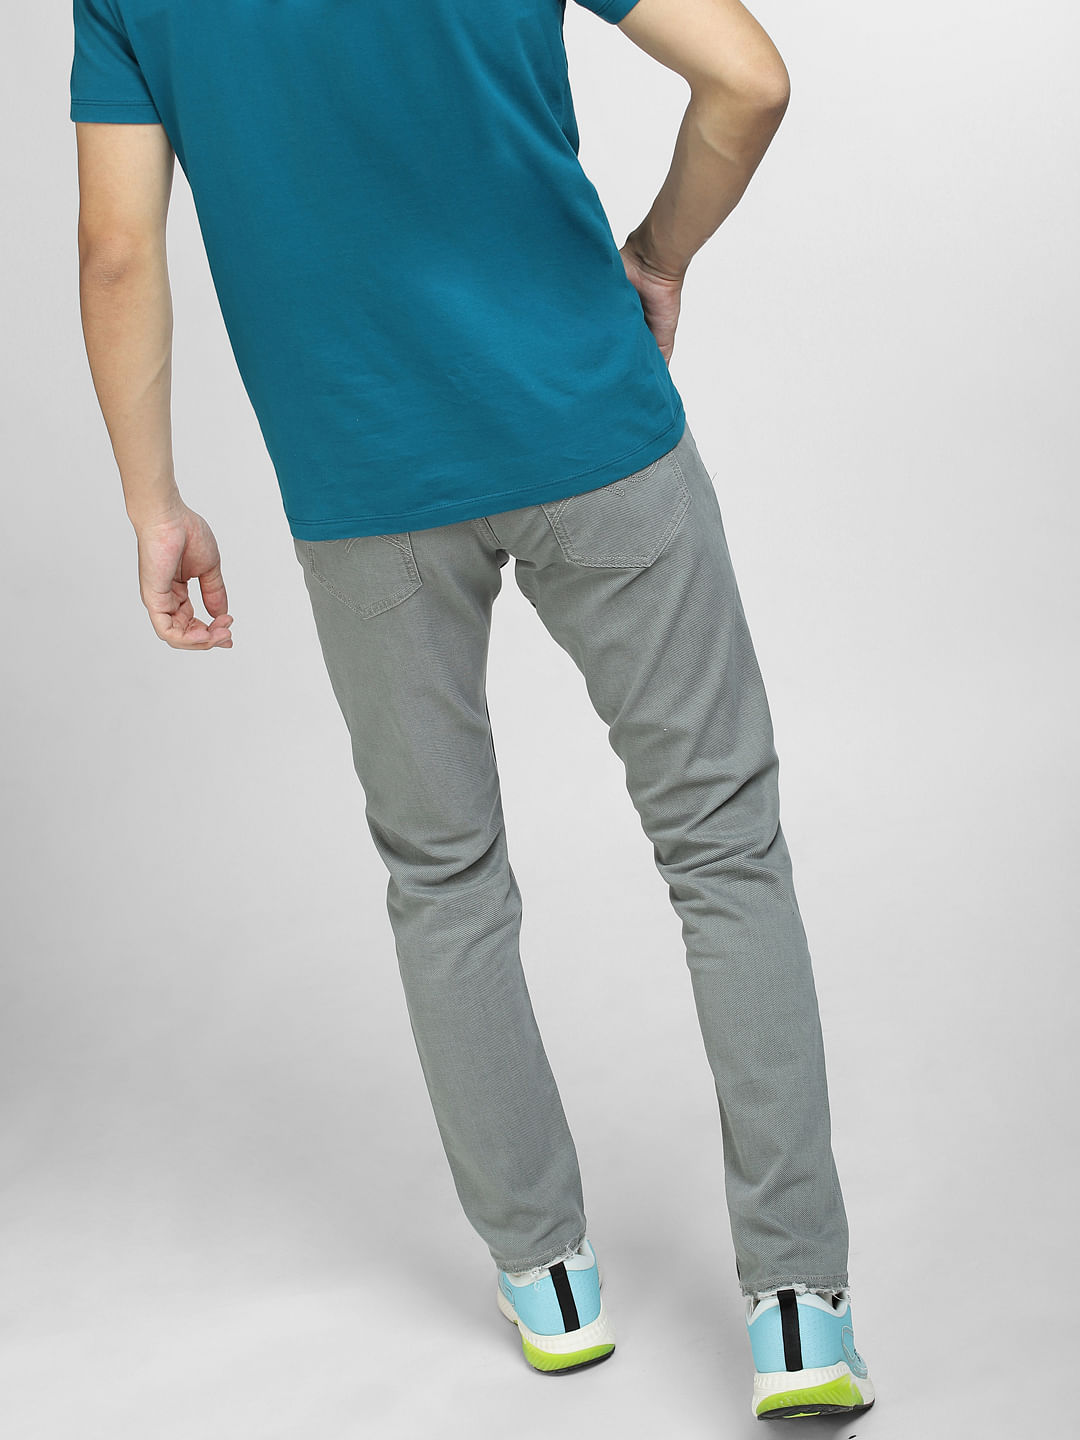 Levis 511 Trousers  Buy Levis 511 Trousers online in India